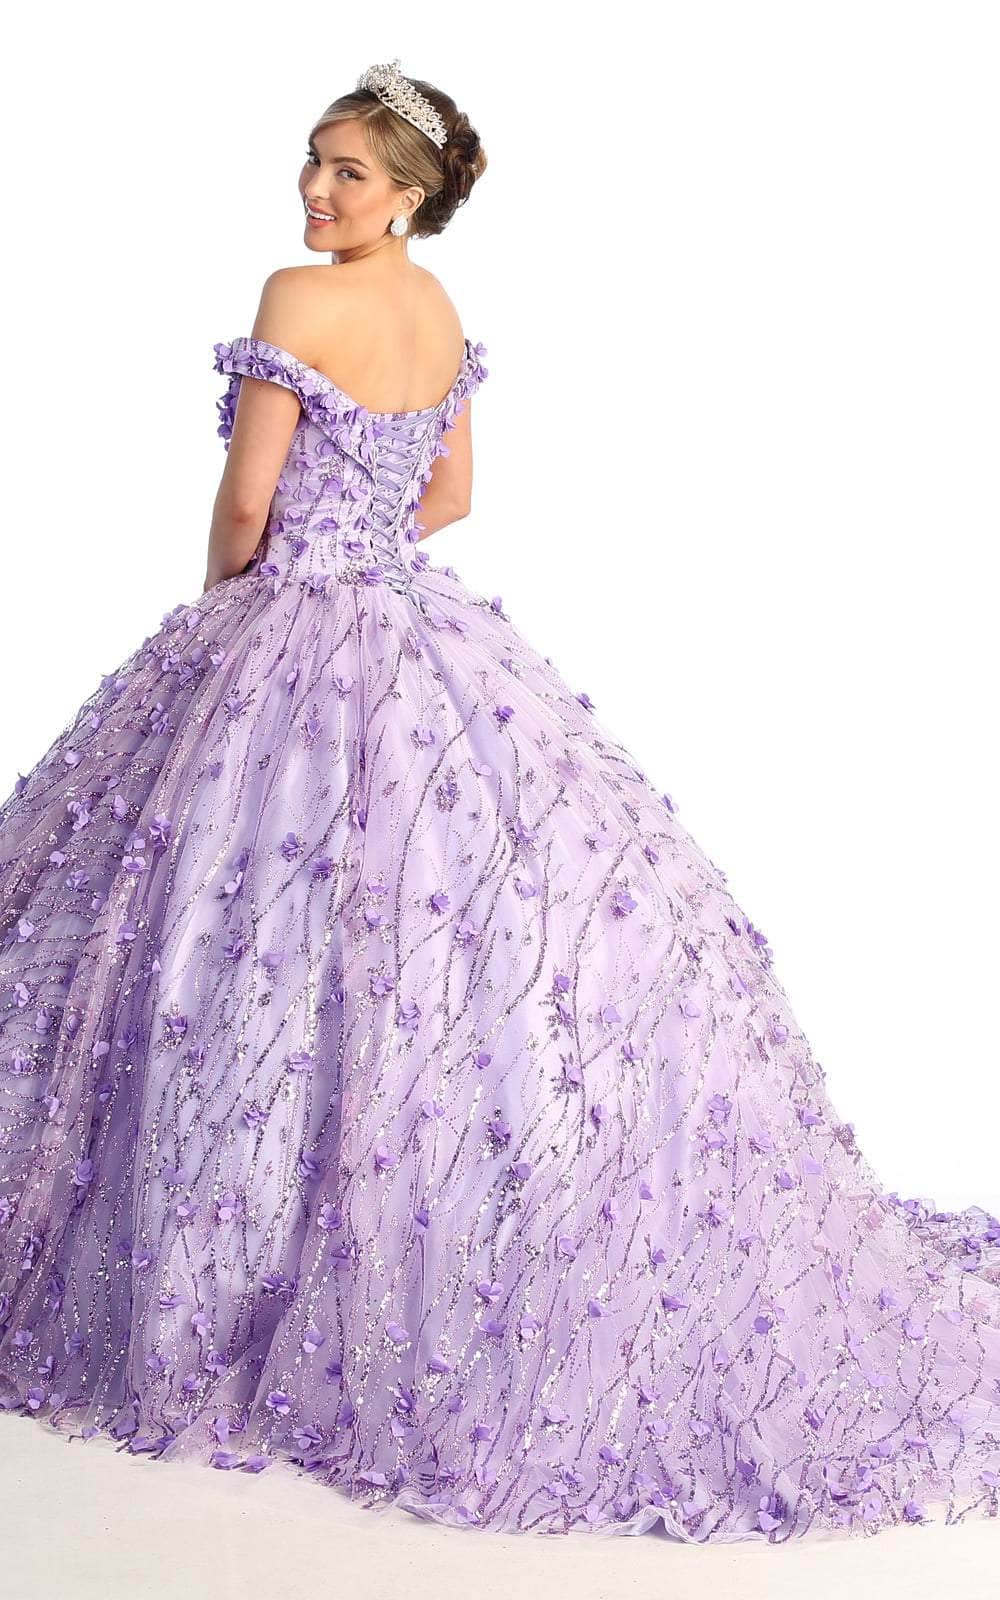 May Queen LK167 - Leaf Applique A Line Gown Ball Gowns